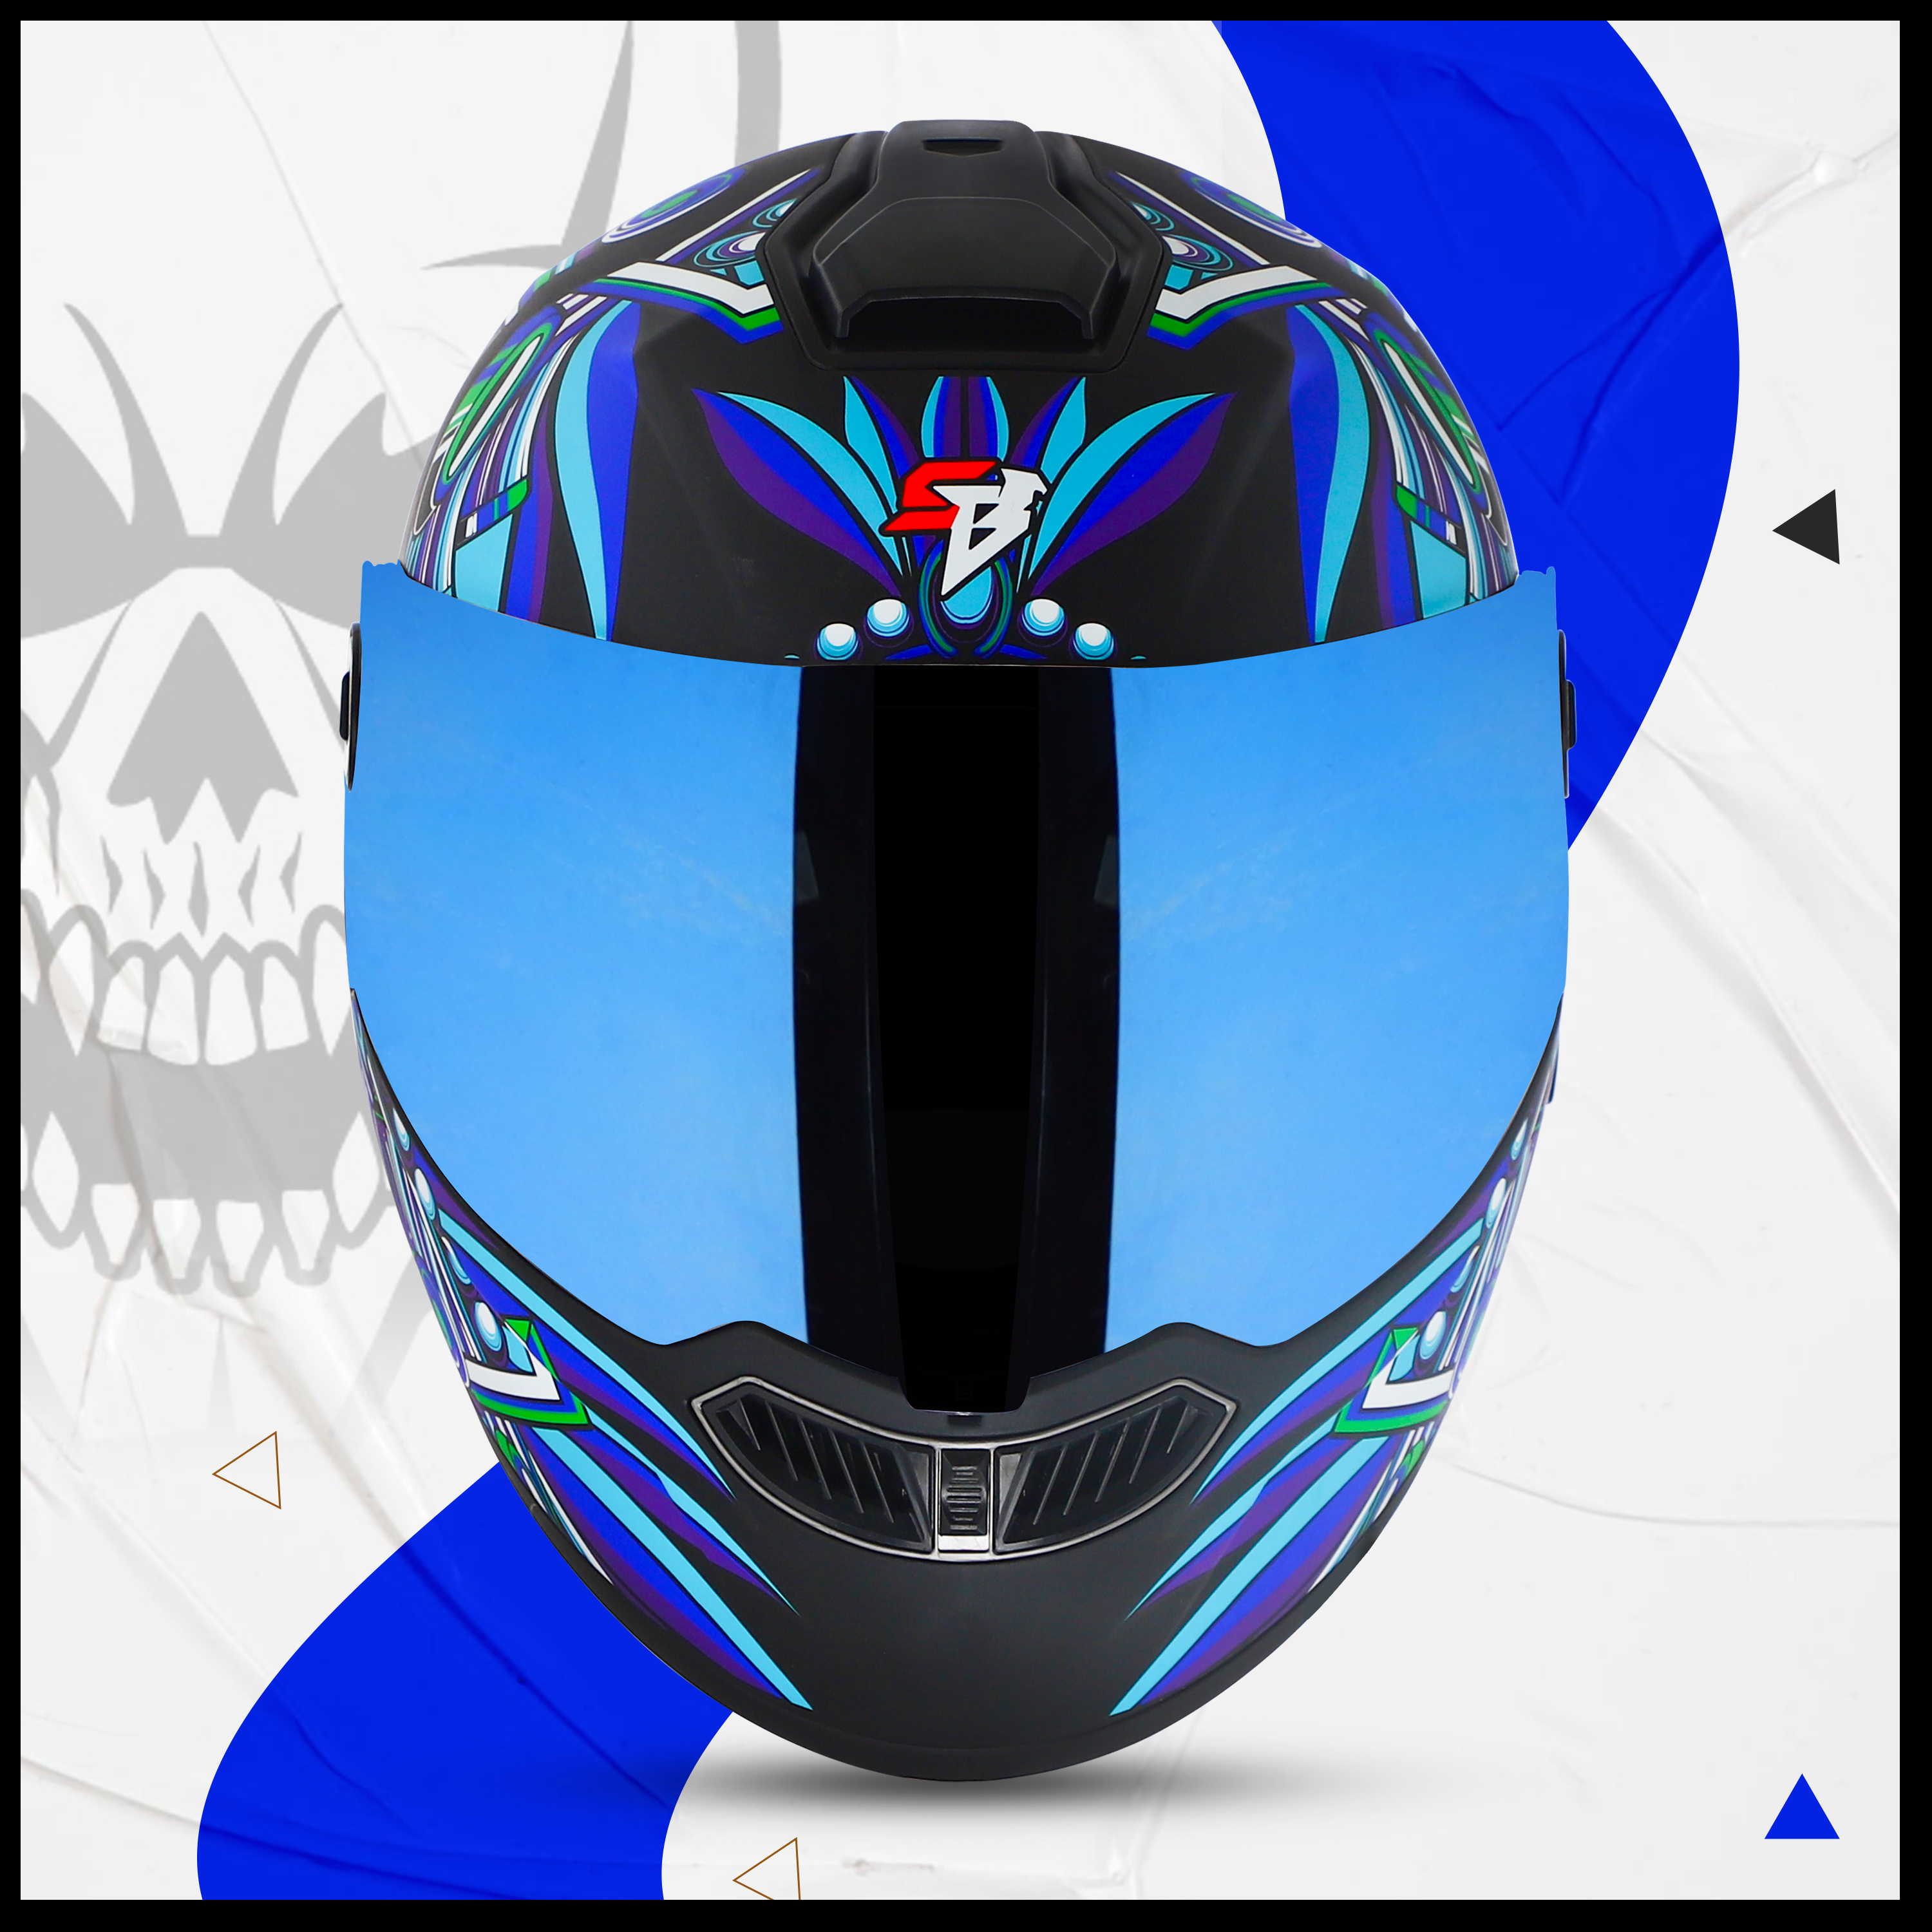 Steelbird SBA-8 Hunt ISI Certified Flip-Up Graphic Helmet For Men And Women With Inner Smoke Sun Shield (Glossy Black Blue With Blue Spoiler And Chrome Blue Visor)